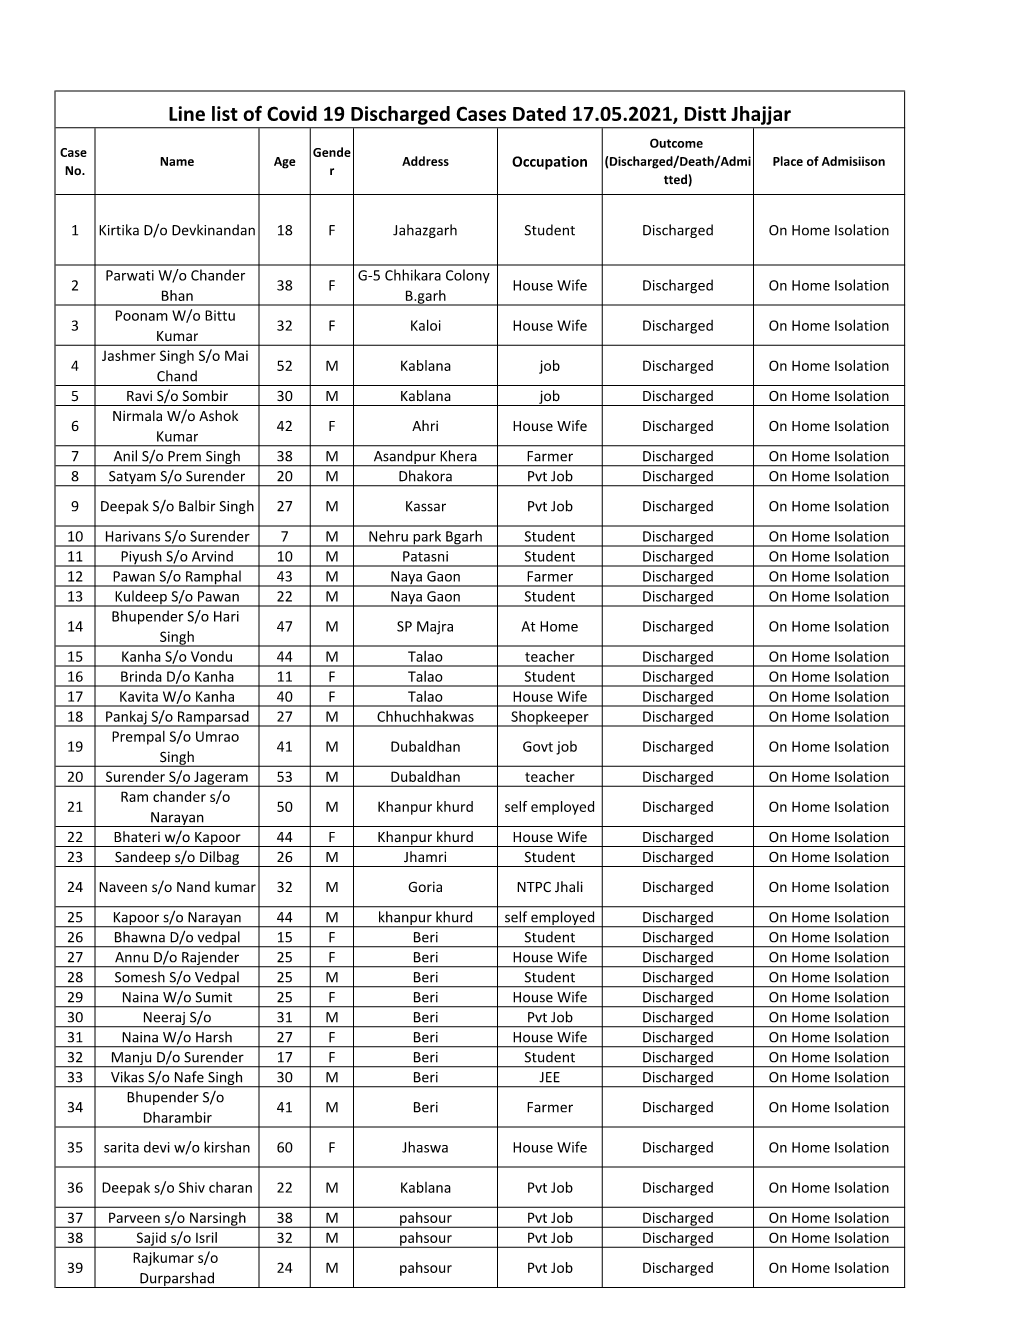 Line List of Covid 19 Discharged Cases Dated 17.05.2021, Distt Jhajjar Outcome Case Gende Name Age Address Occupation (Discharged/Death/Admi Place of Admisiison No